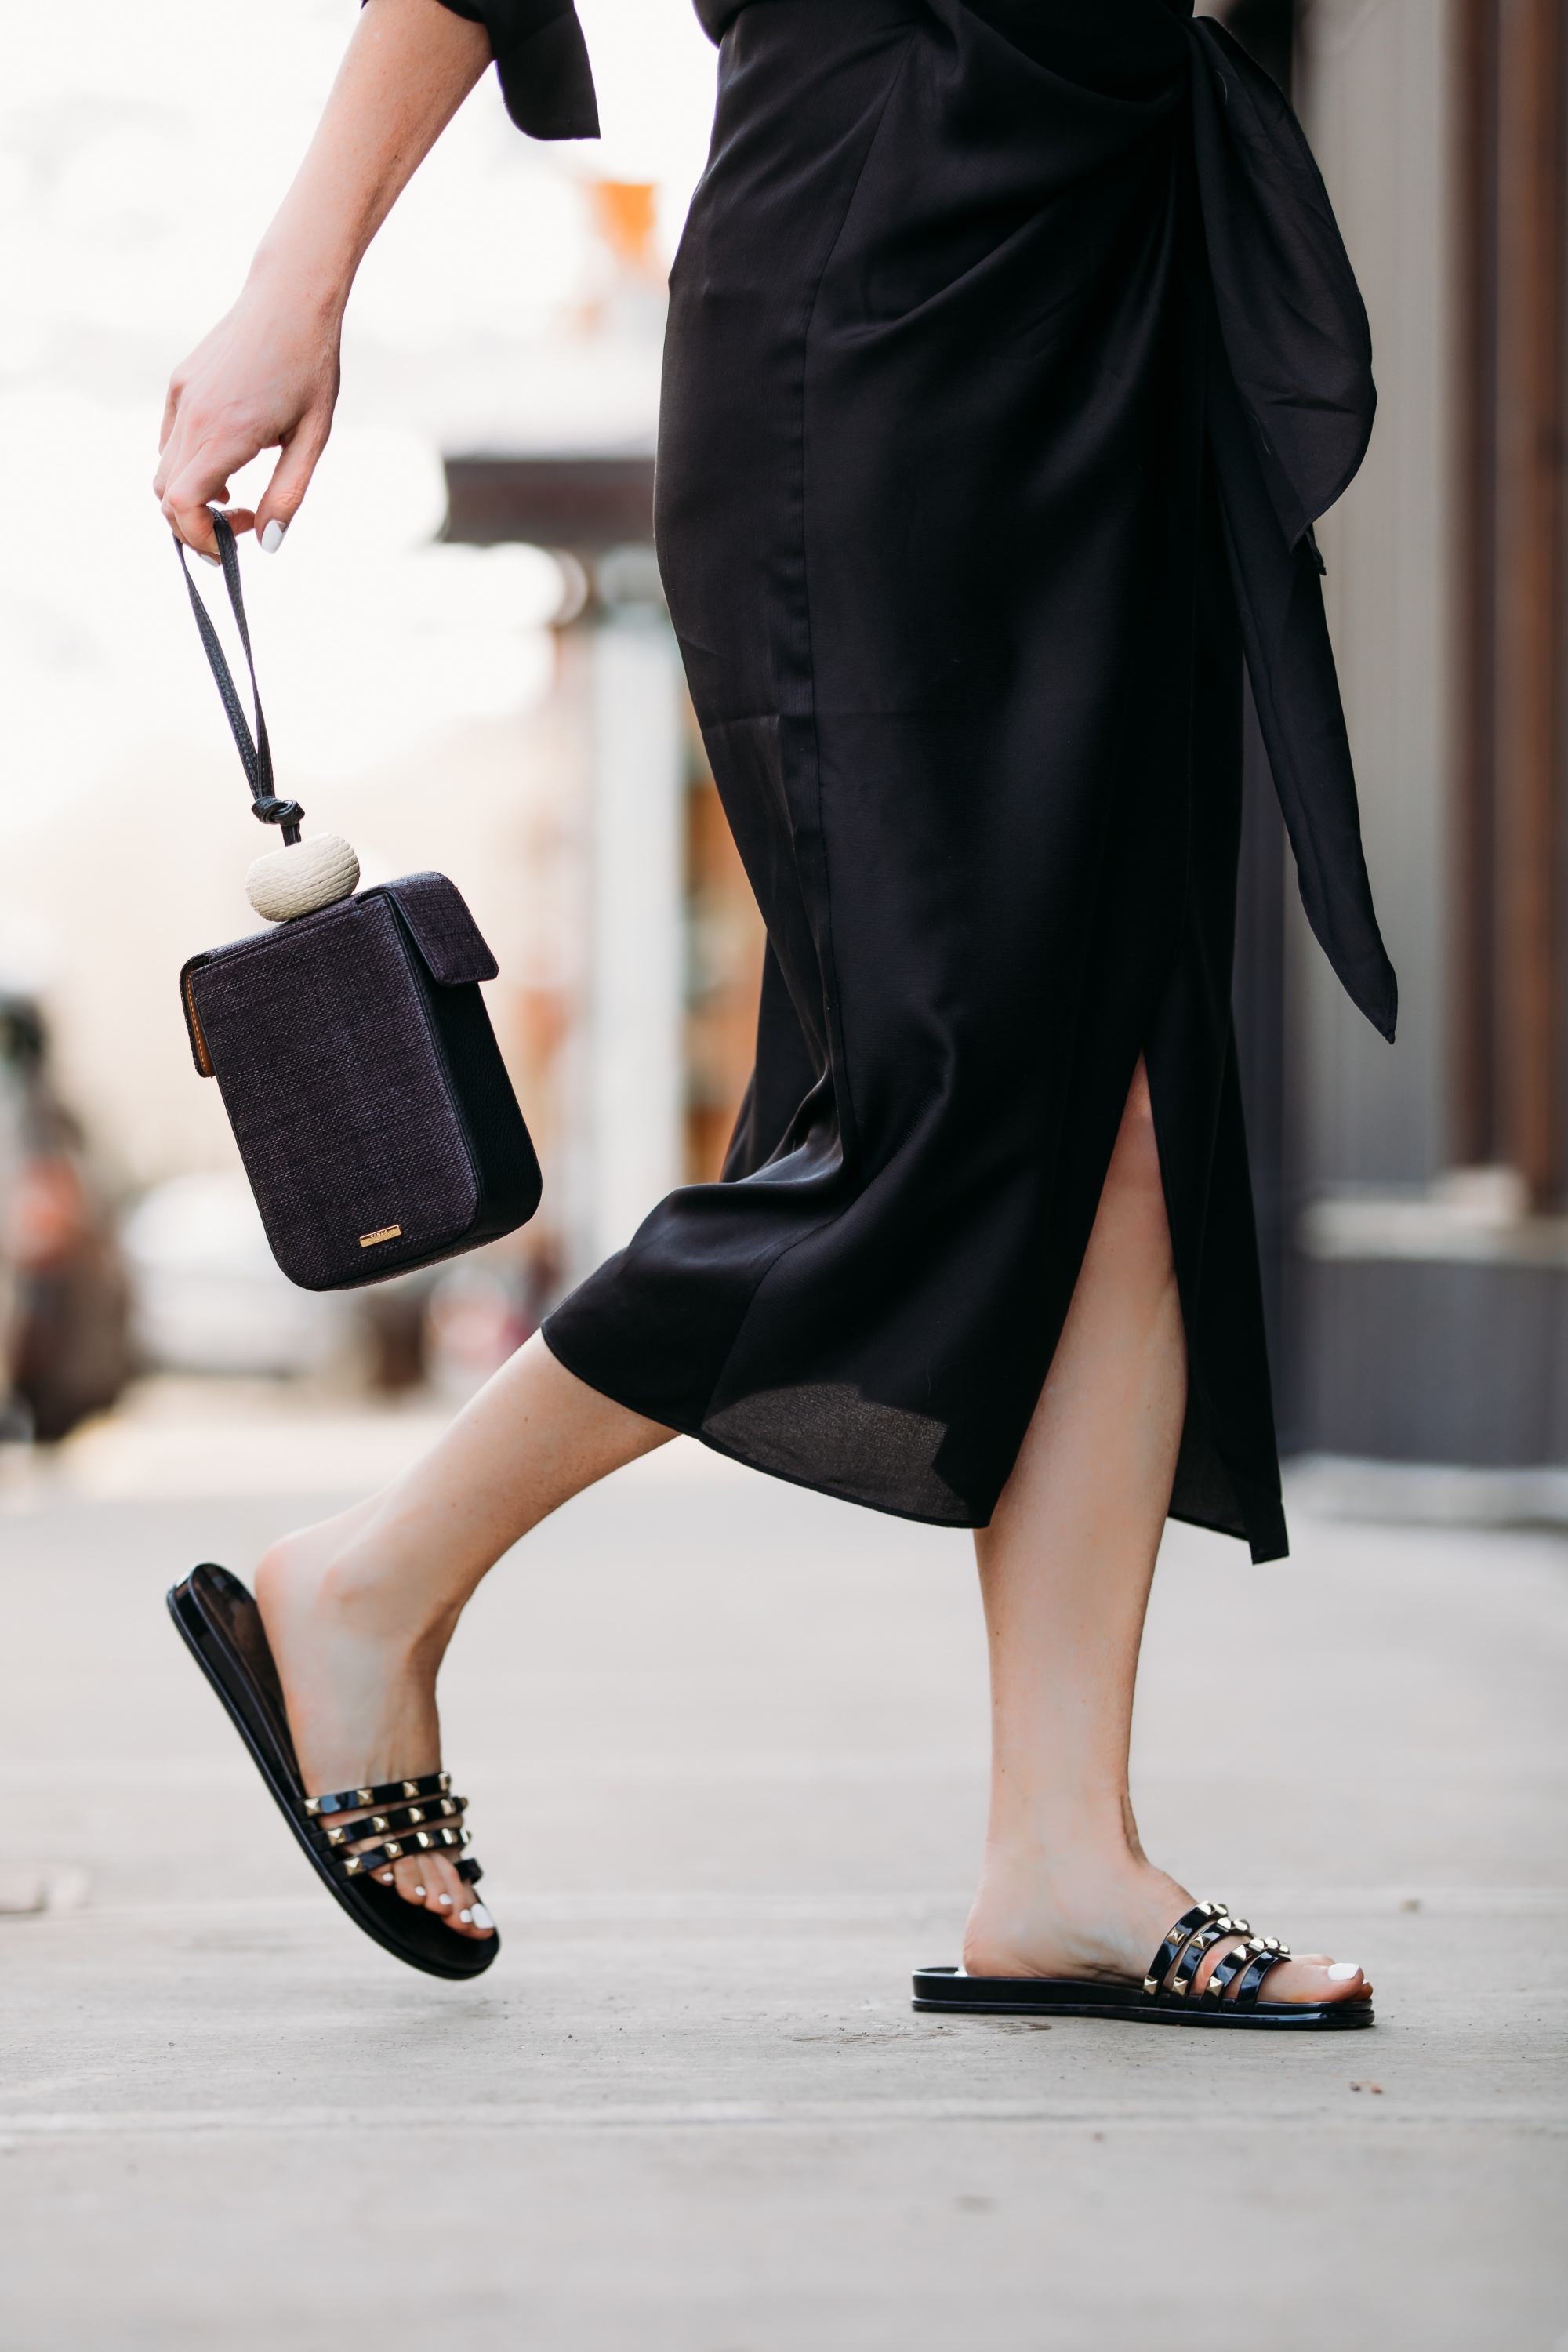 Spring Accessories, Fashion blogger Erin Busbee of BusbeeStyle.com wearing a black L'Academie shirt dress with black studded strappy slides and black bracelet bag from Vince Camuto in Telluride, Colorado